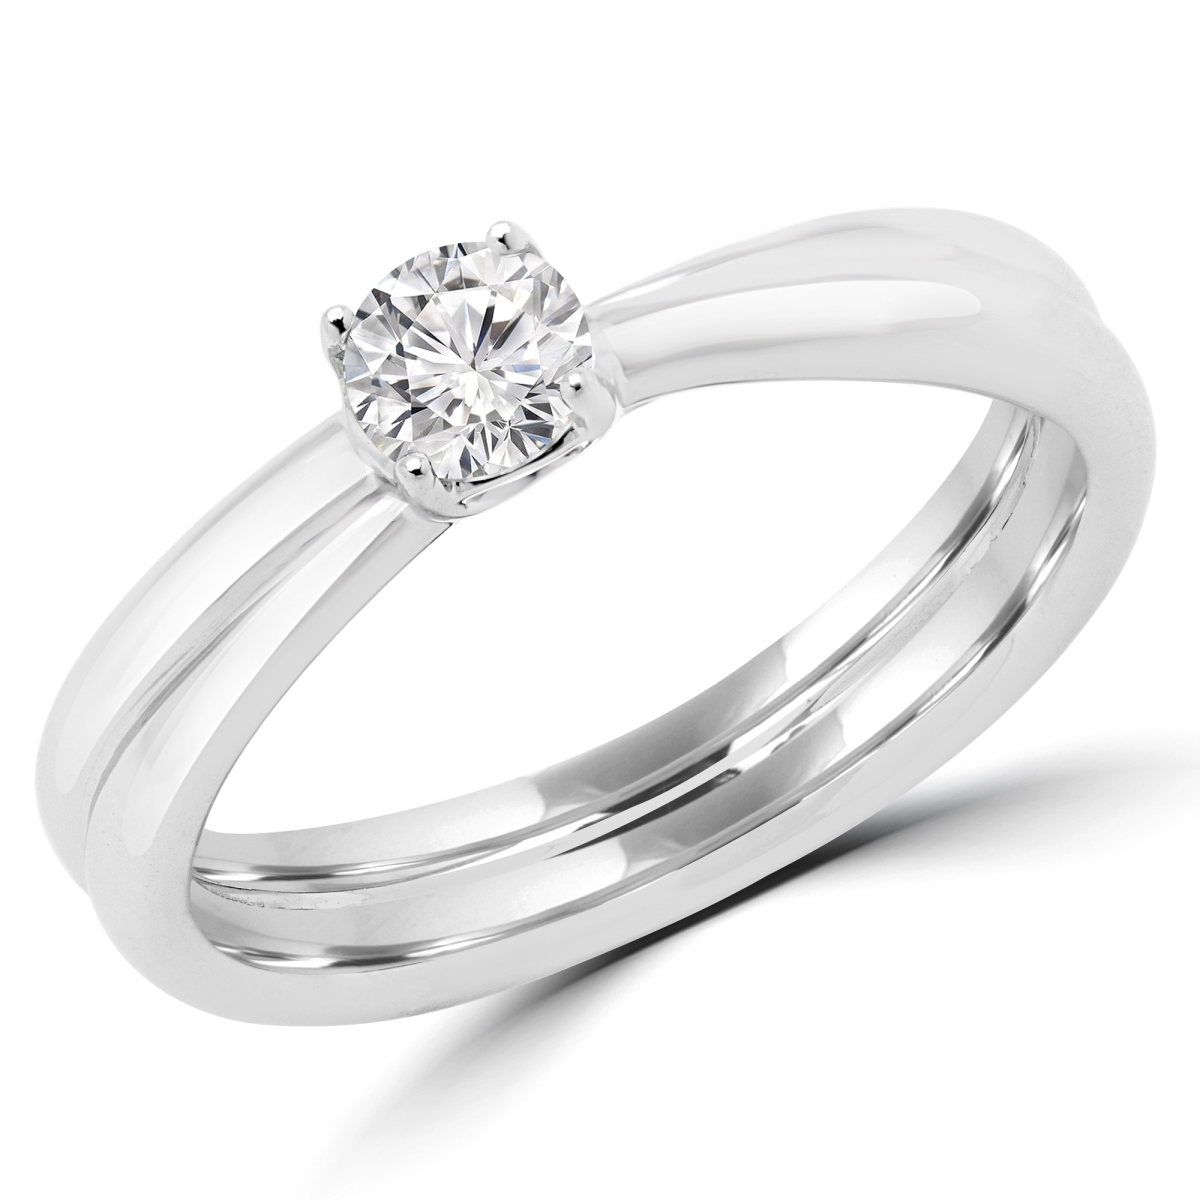 Picture of Majesty Diamonds MDR170048 0.25 CT Round Diamond Promise Solitaire Engagement Ring in 14K